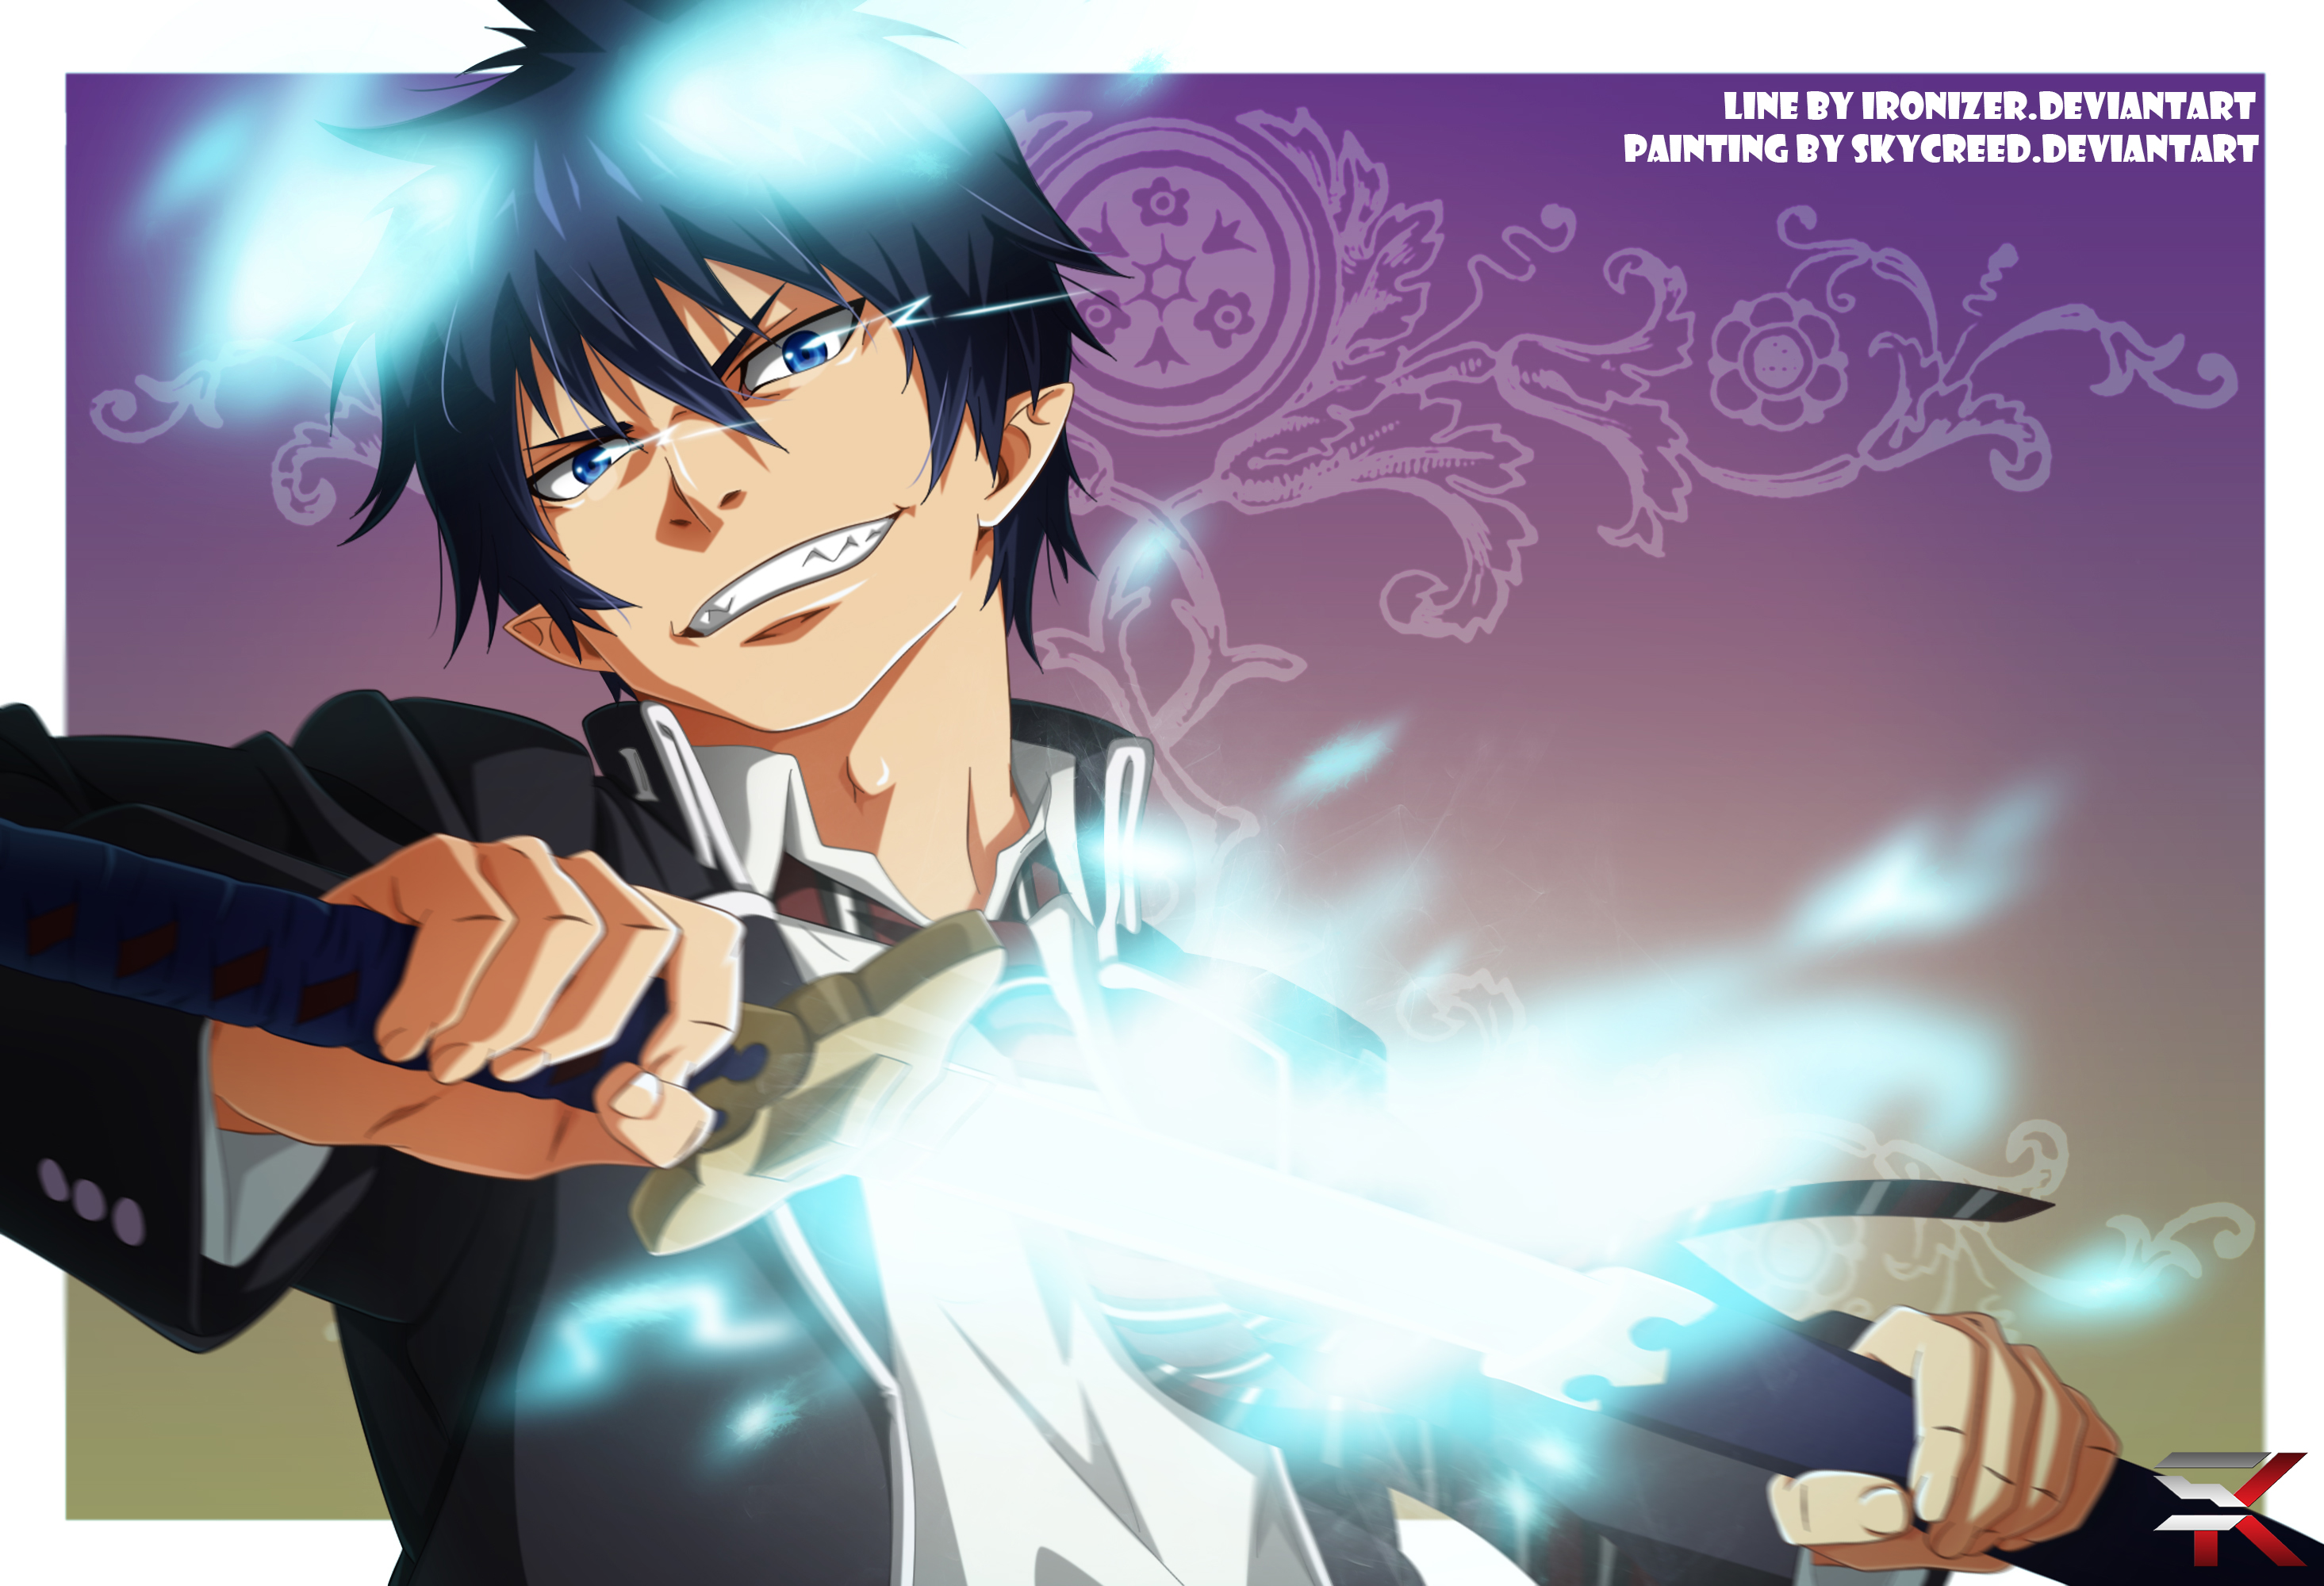 4. "Blue Exorcist" - wide 5